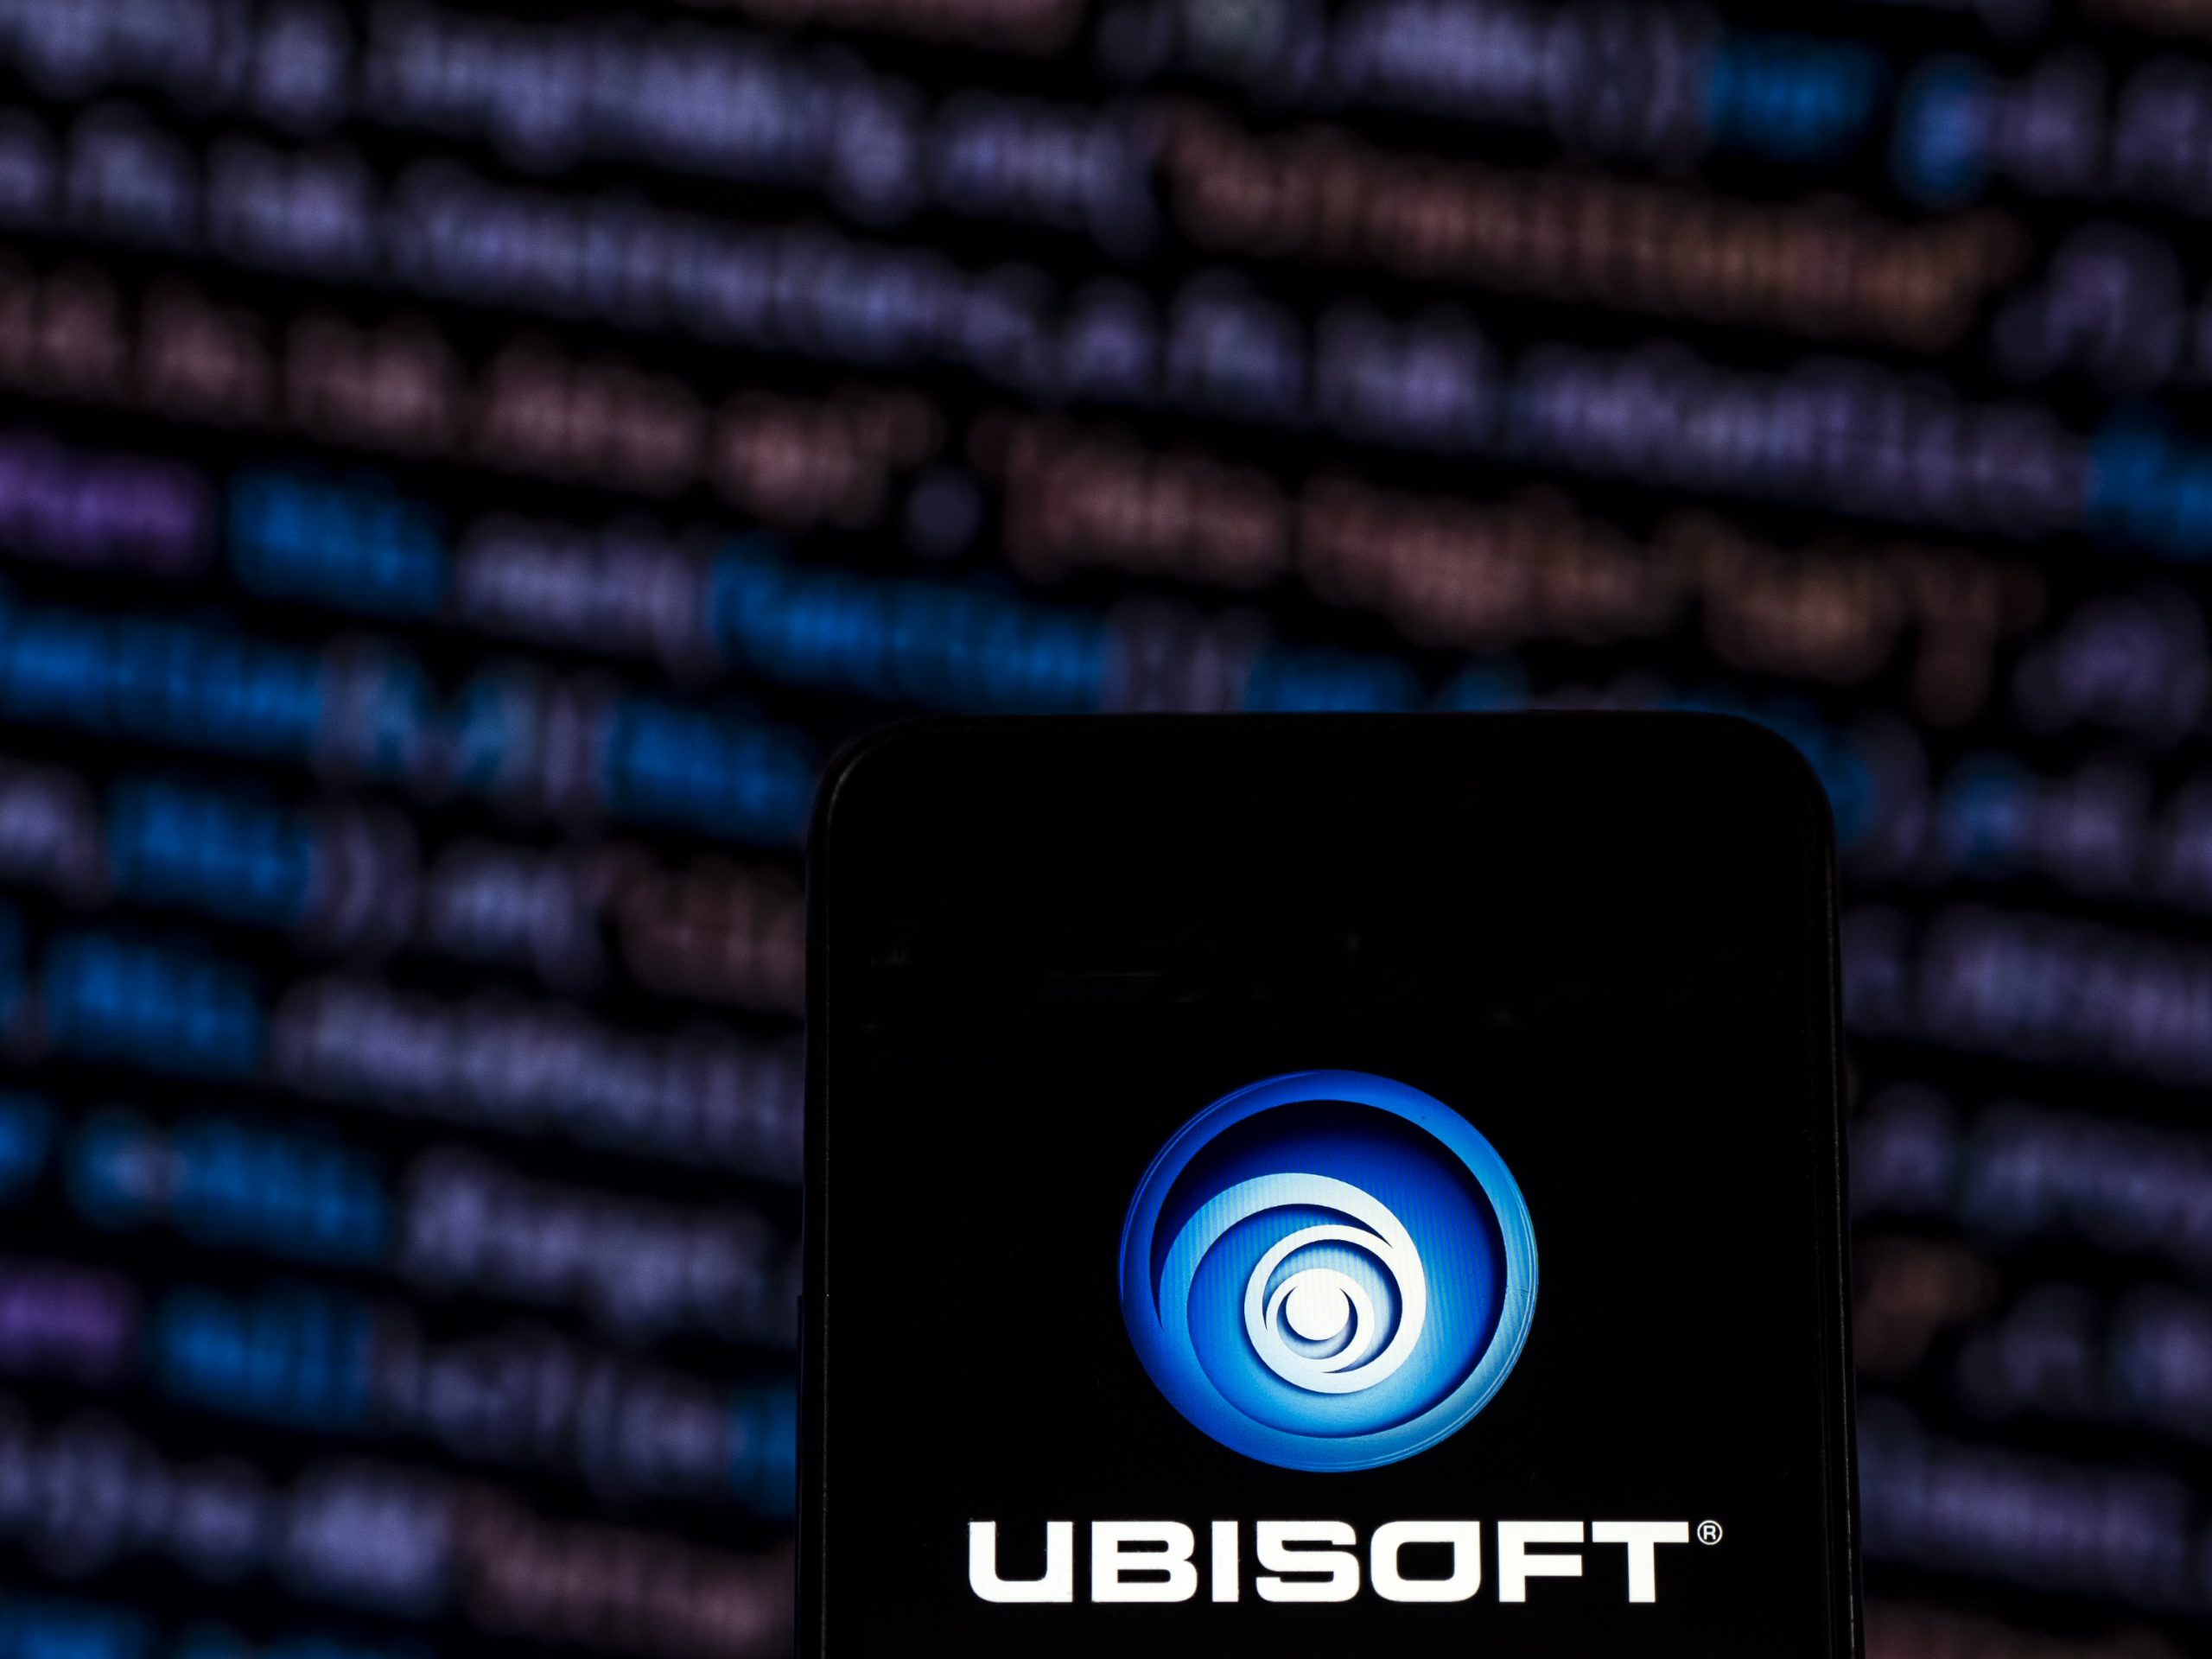 Ubisoft share price up due to strong Assassin's Creed Valhalla sales